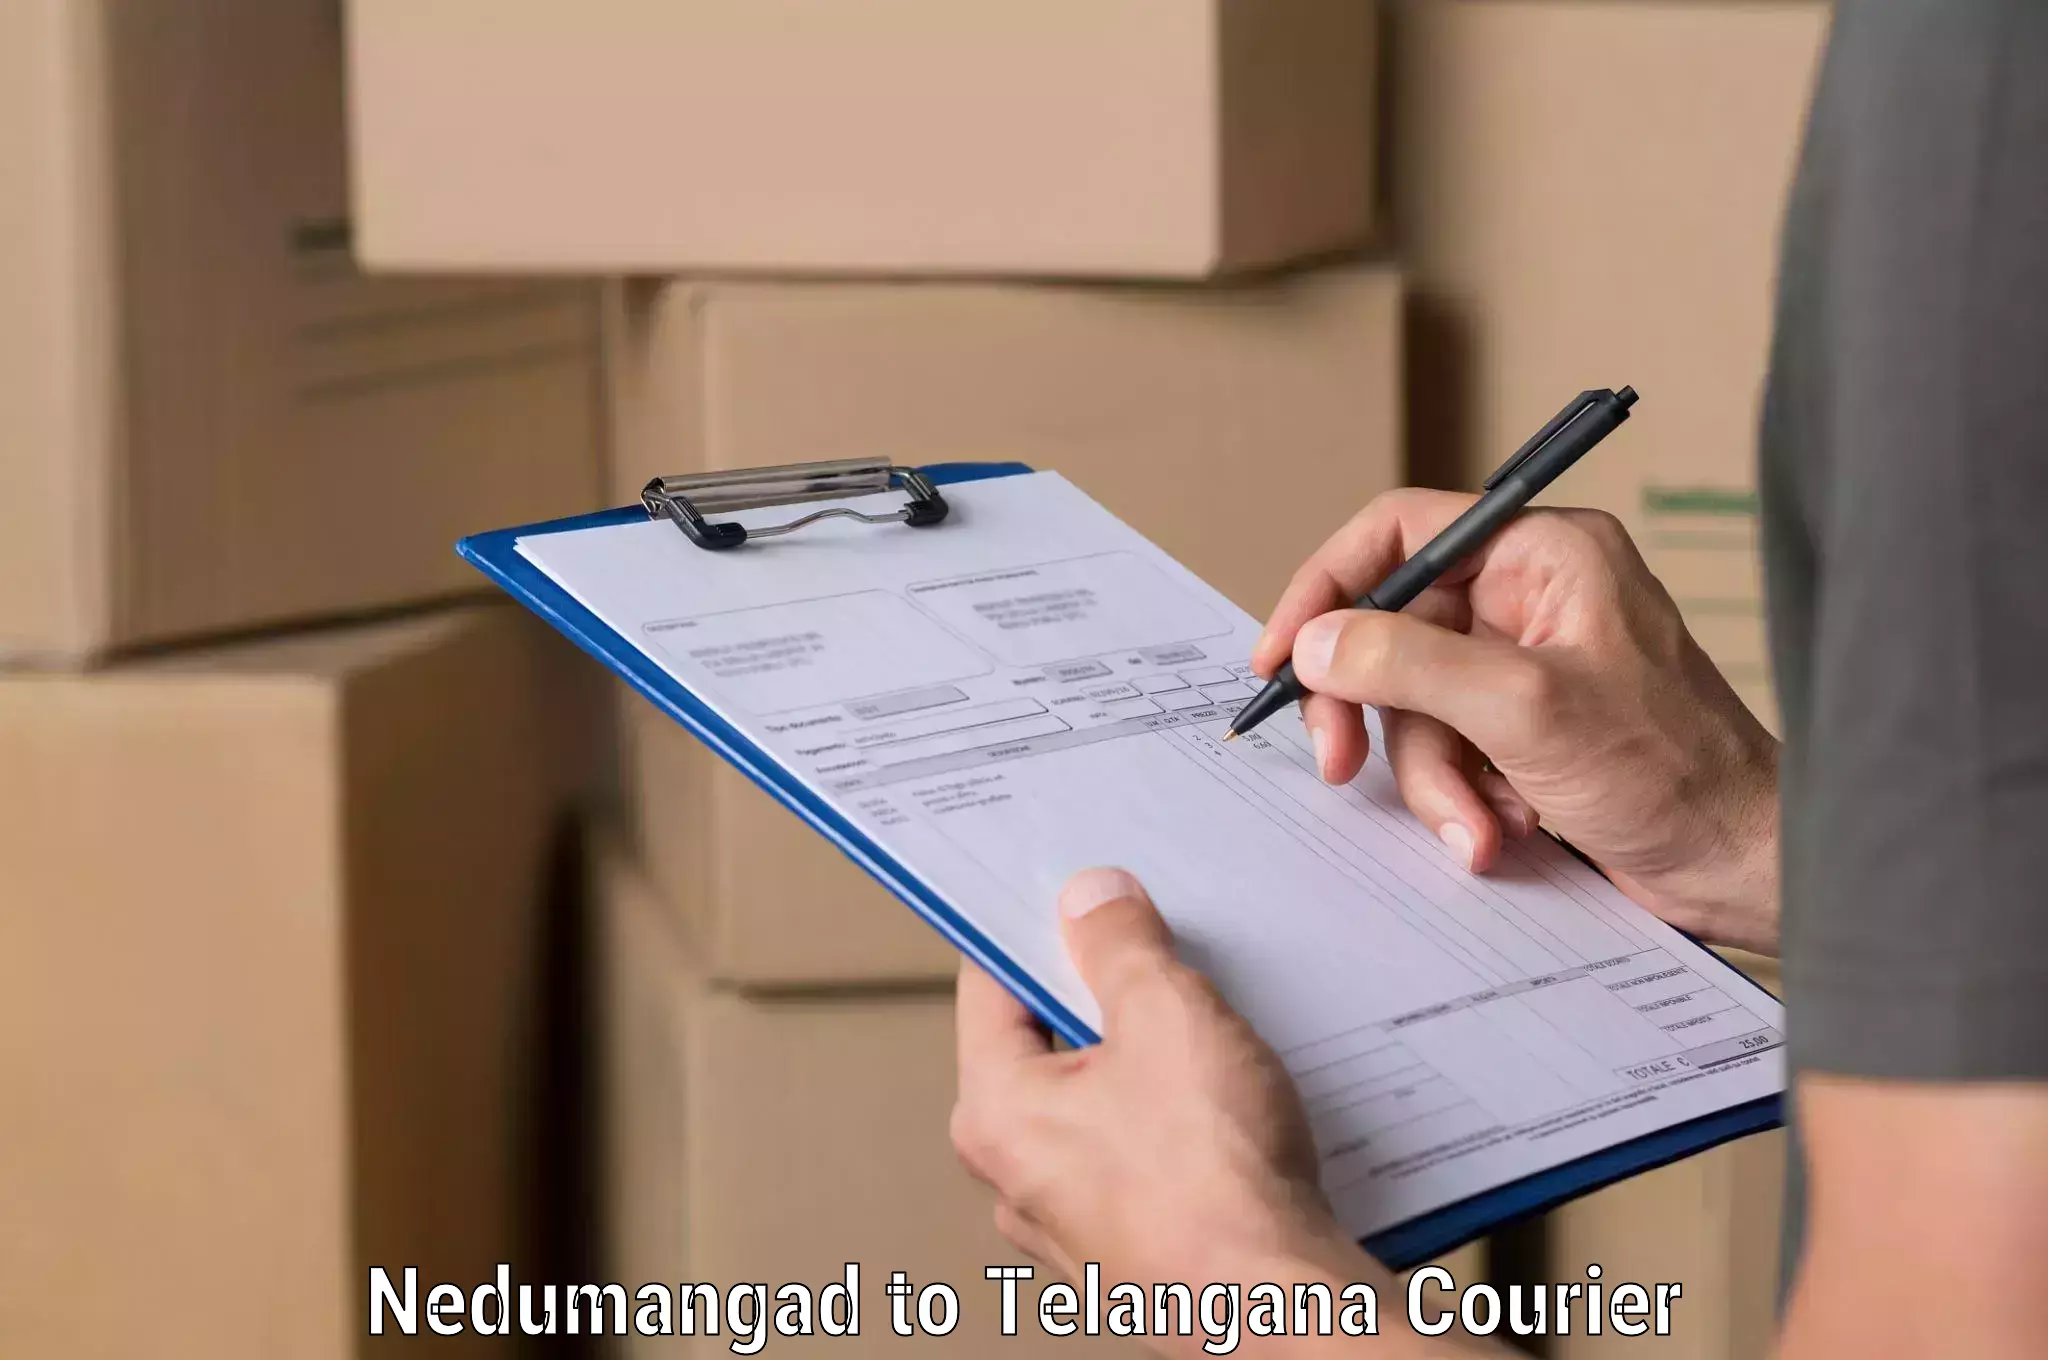 Nationwide delivery network in Nedumangad to Pathipaka